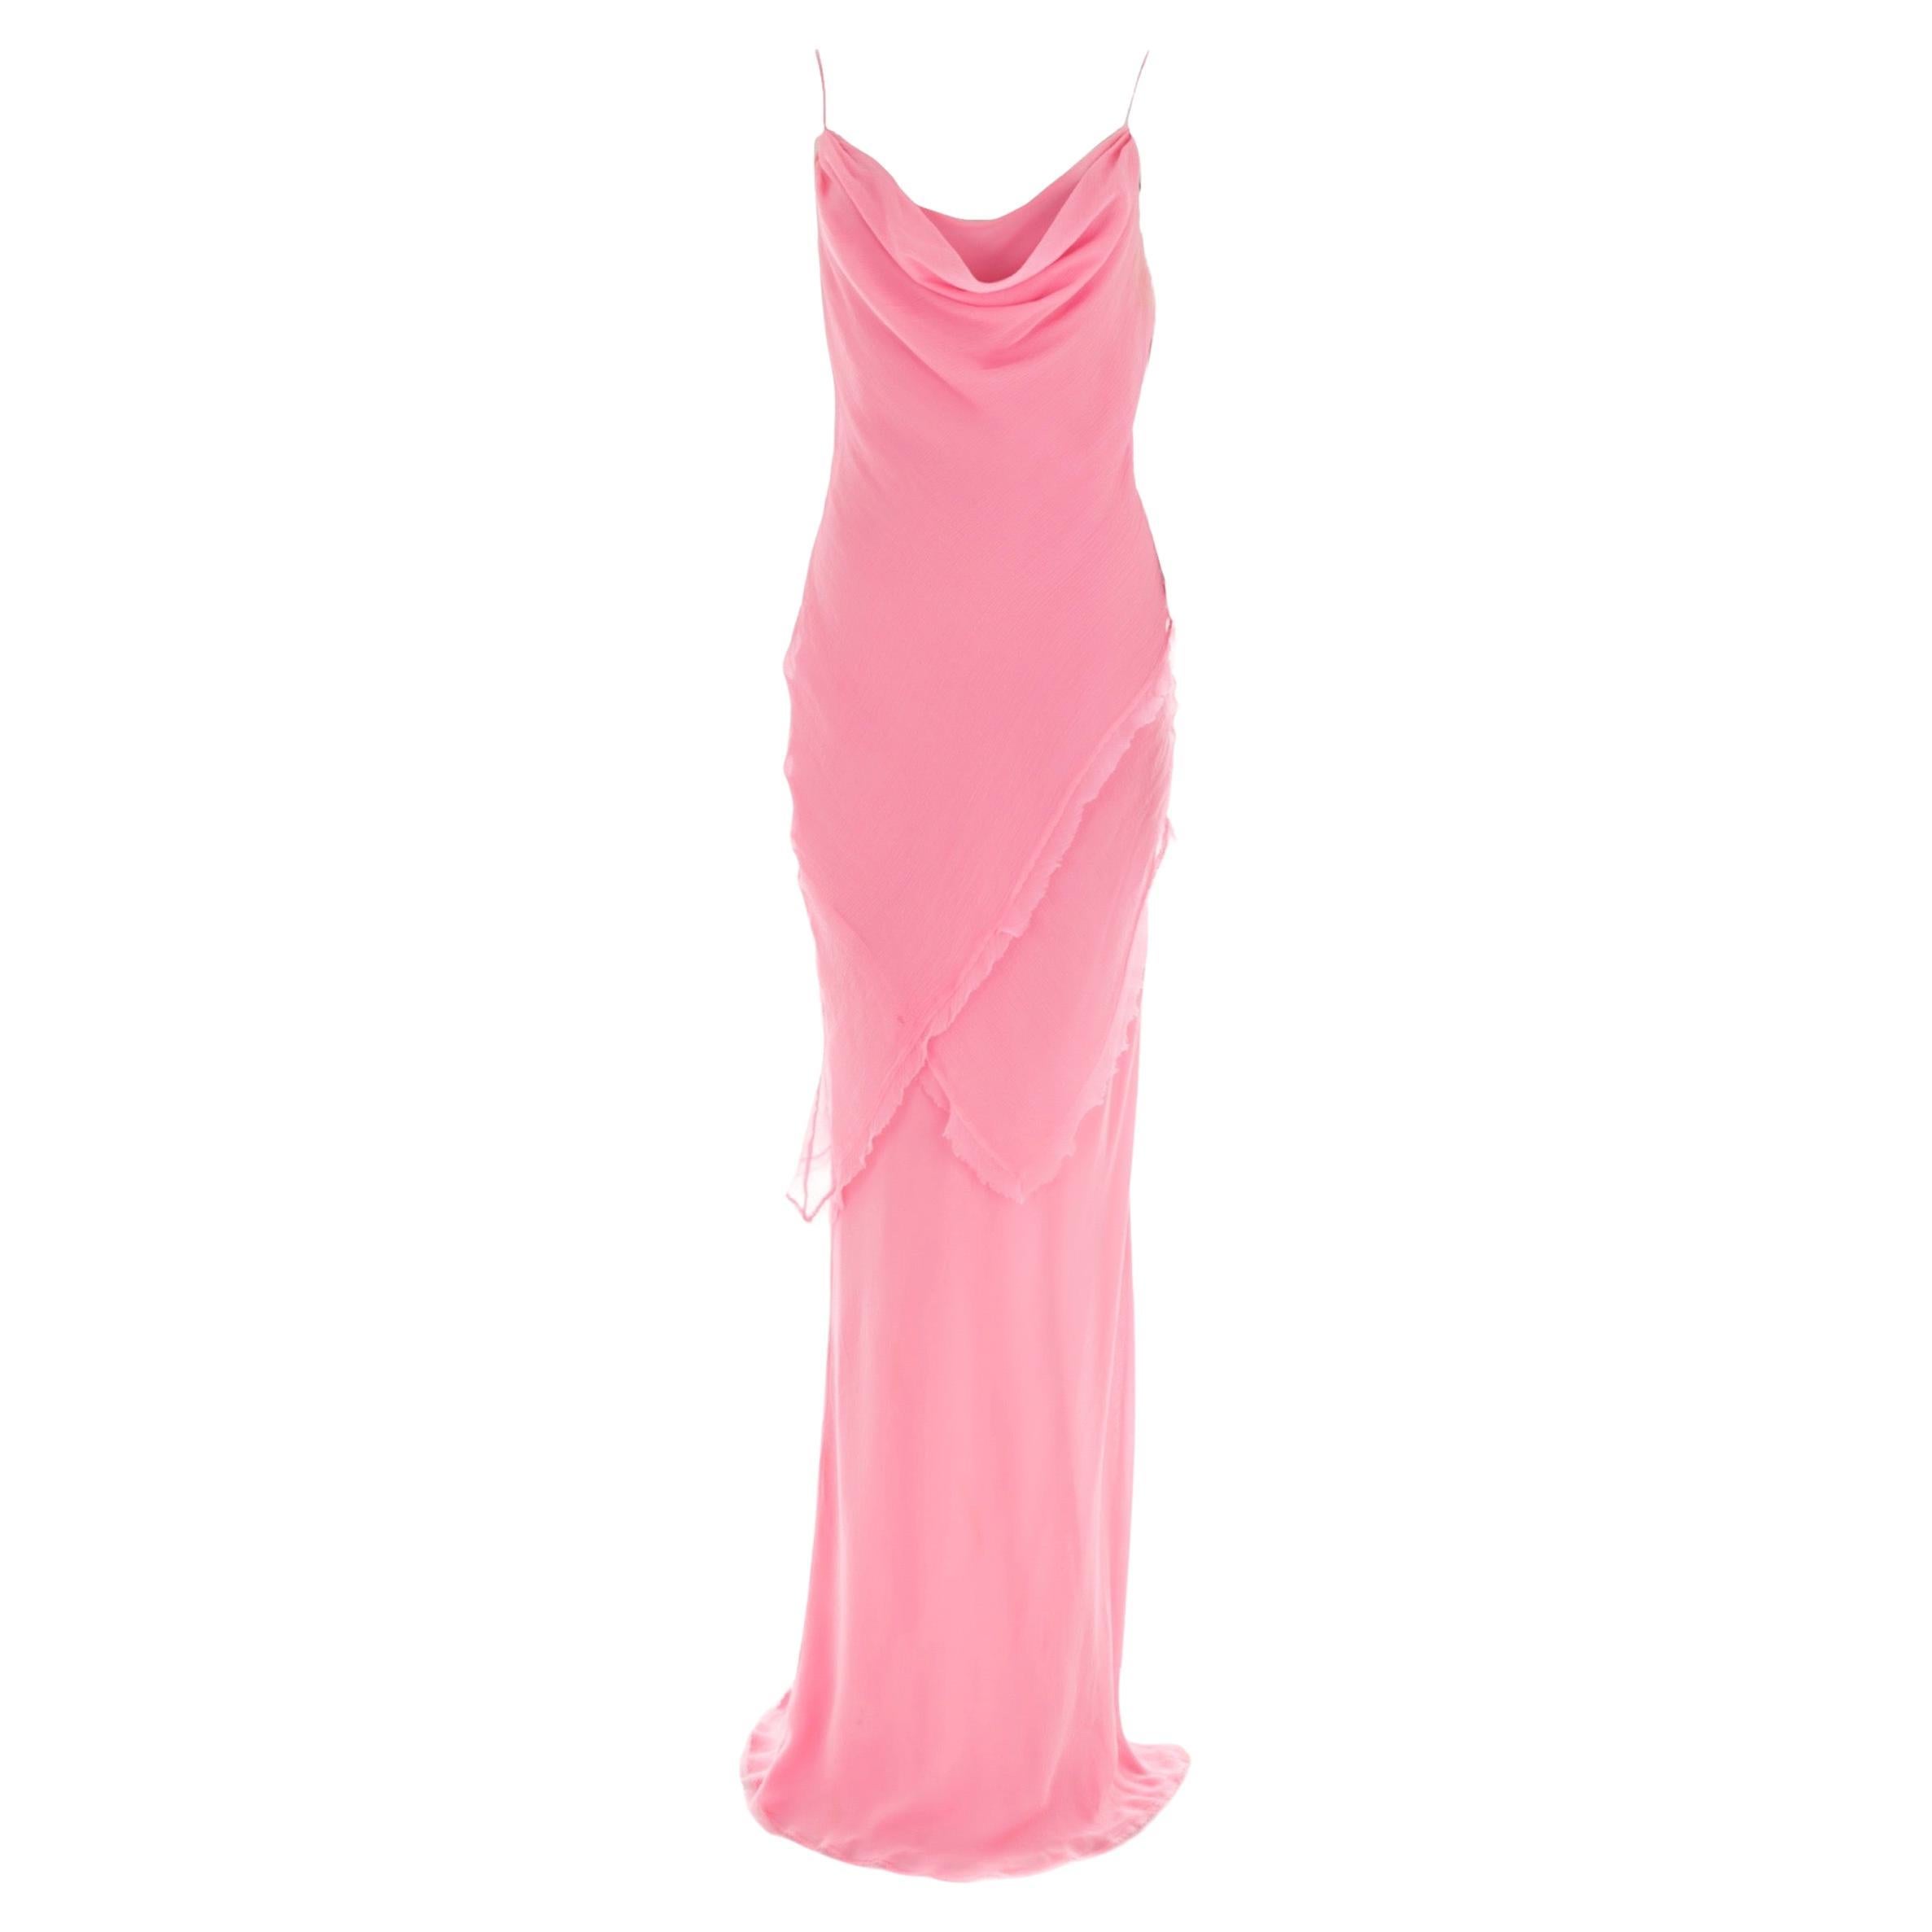 Ermanno Scervino S/S 2004 multi-layered pink chiffon gown with side slit For Sale